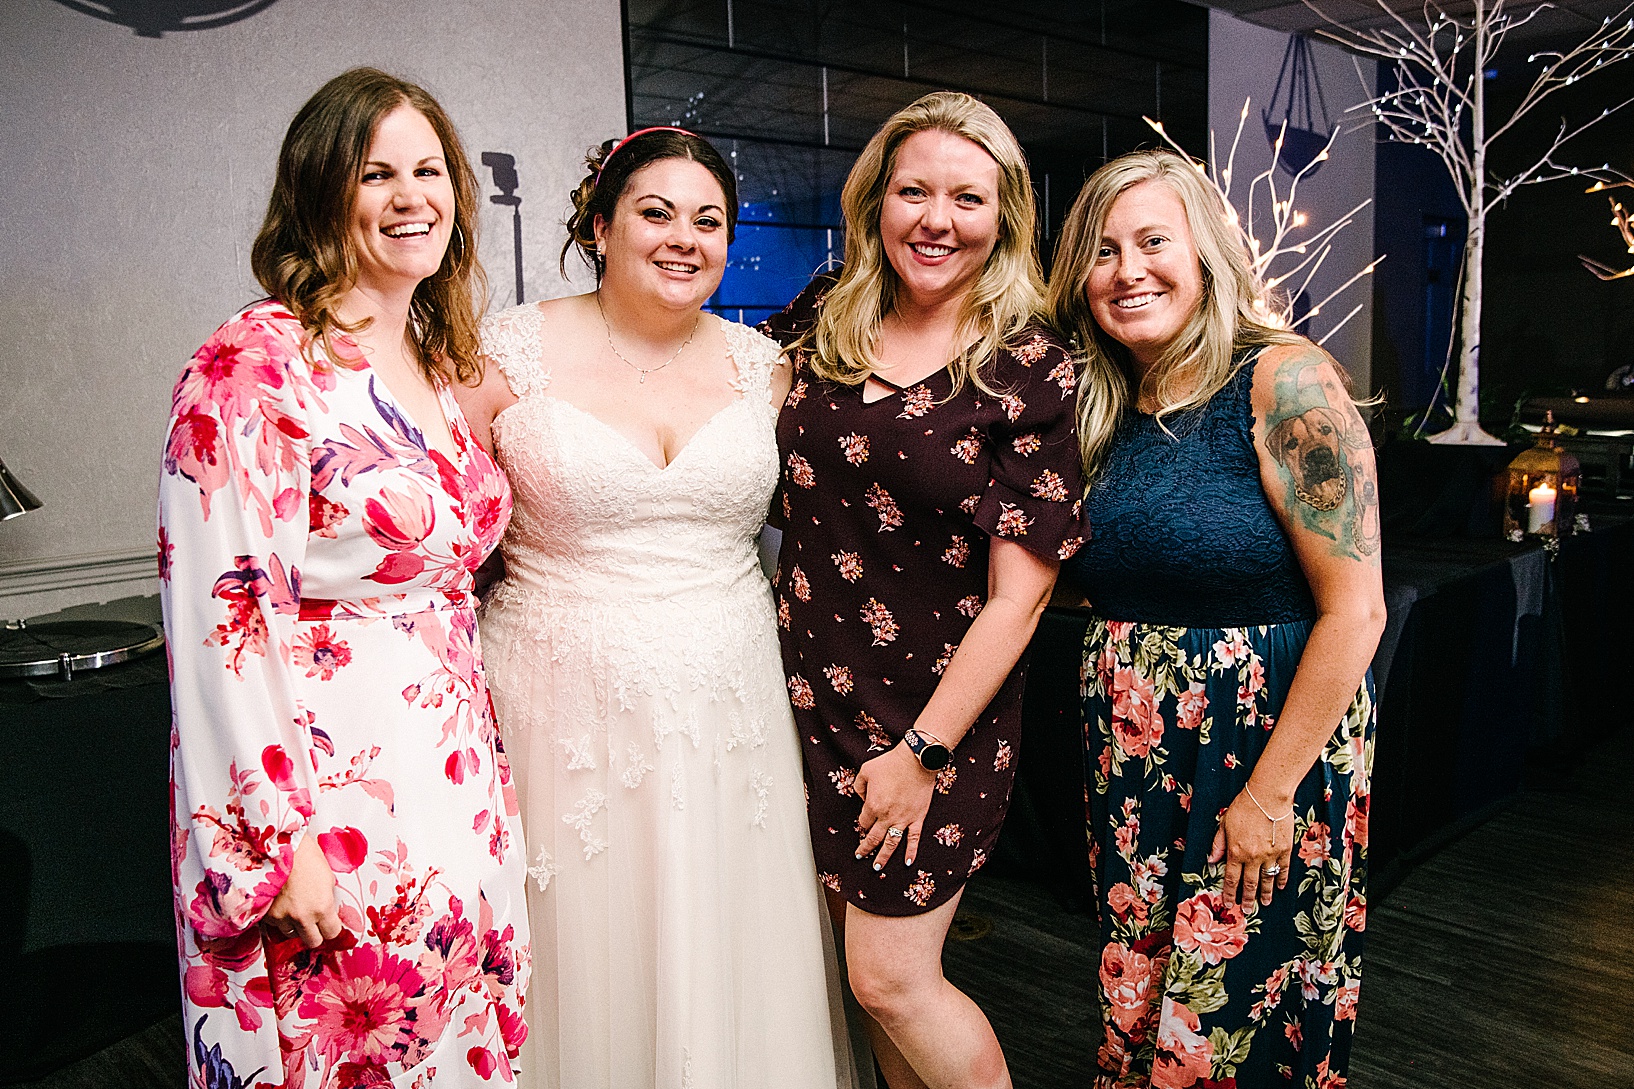 Bride poses and smiles with three ladies at post wedding celebration